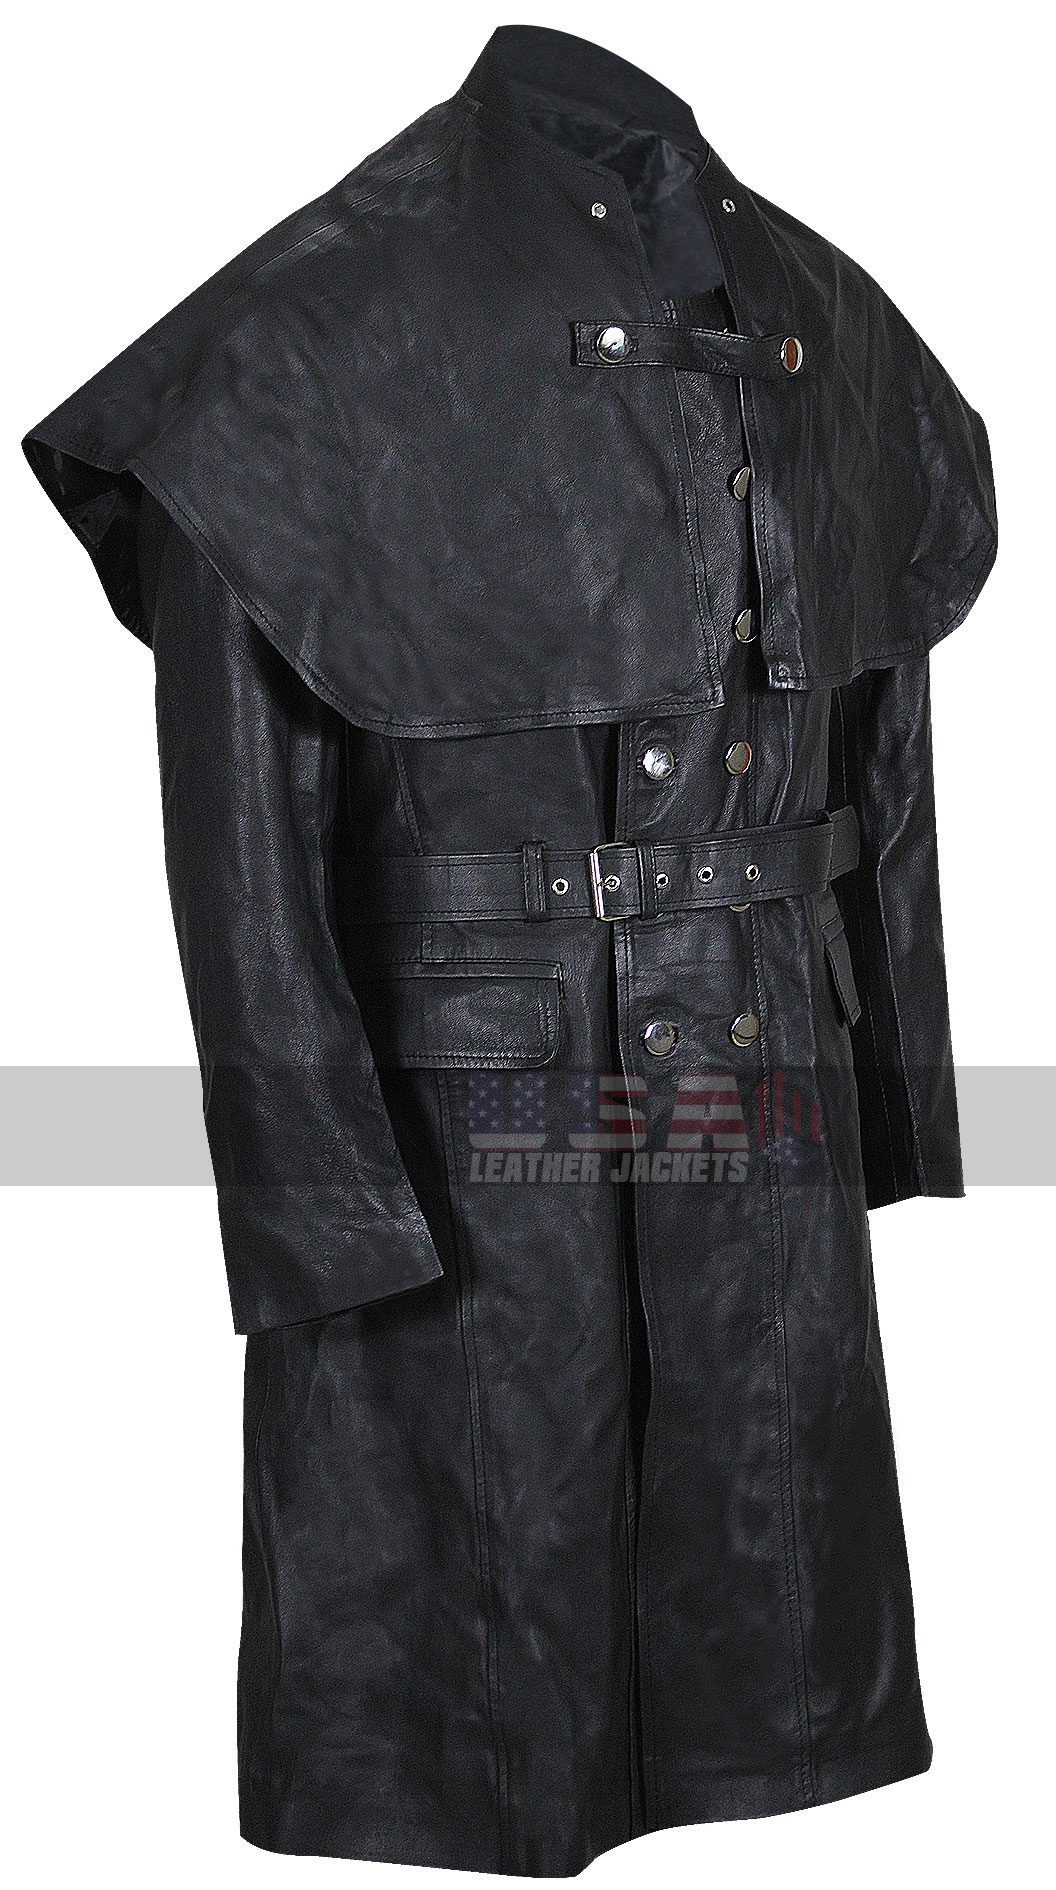 Bloodborne Yharnamite Cosplay Gothic Trench Costume Black Leather Coat